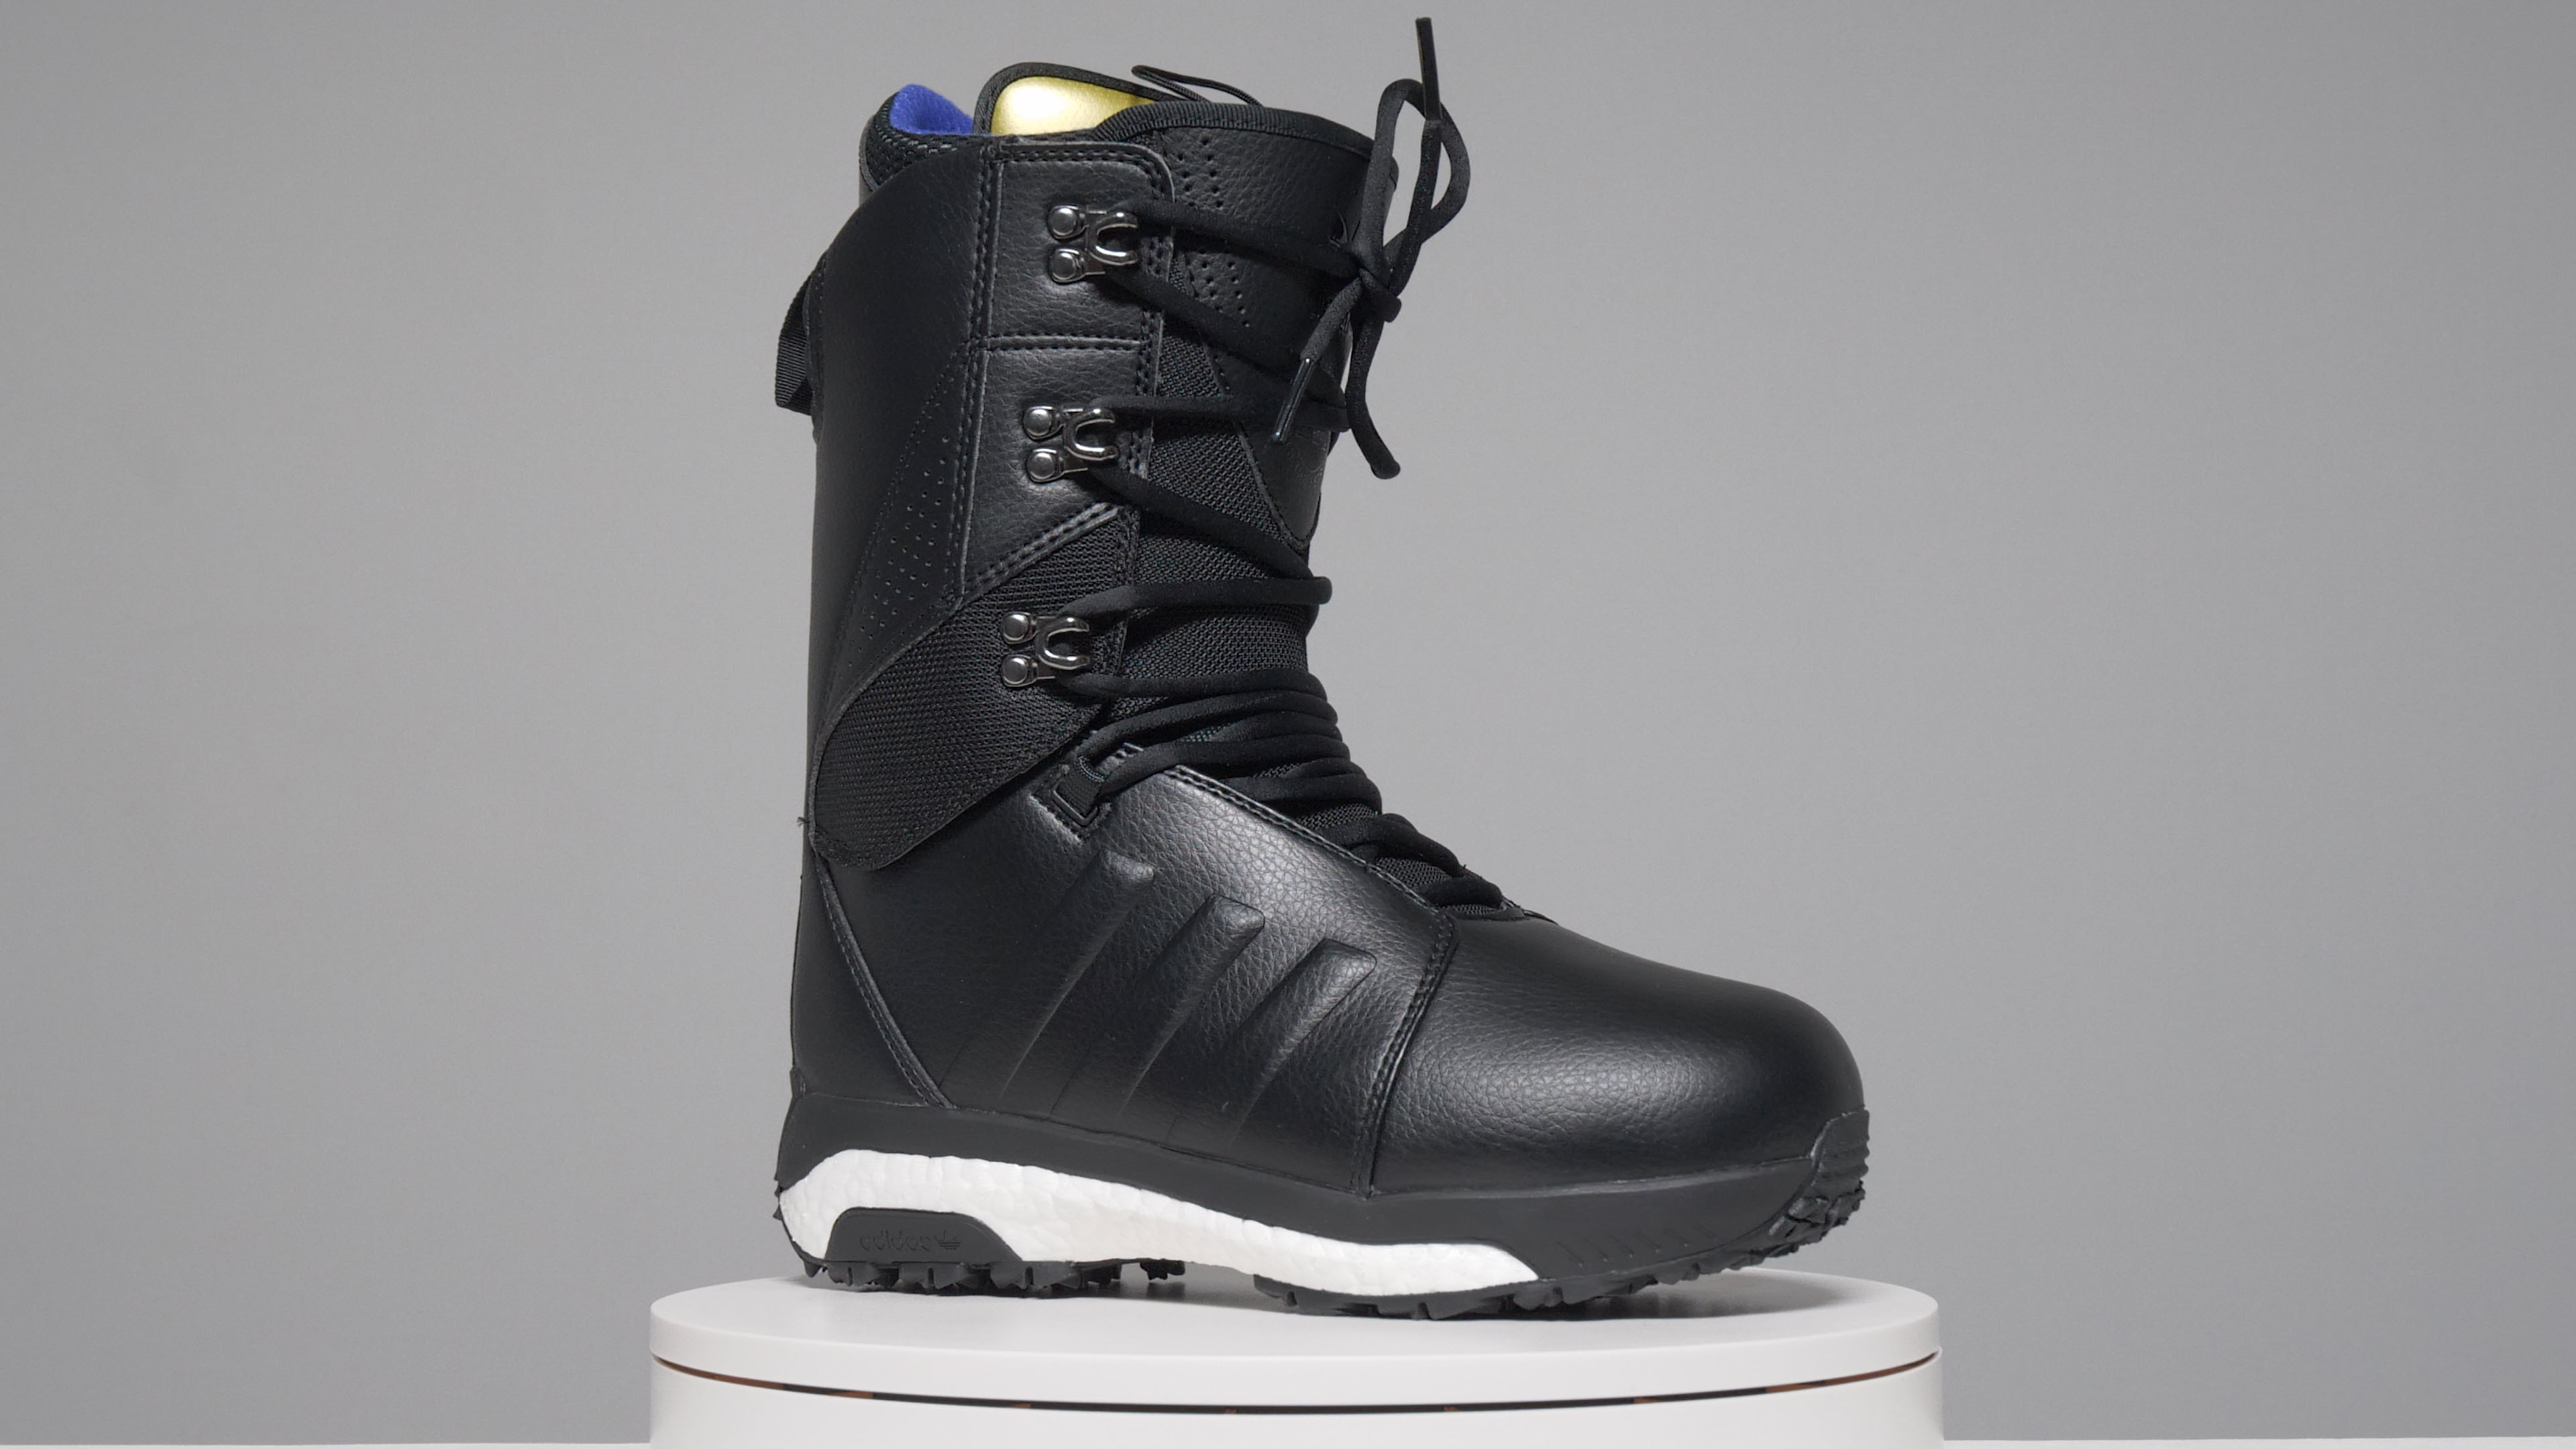 adidas snowboard boot review